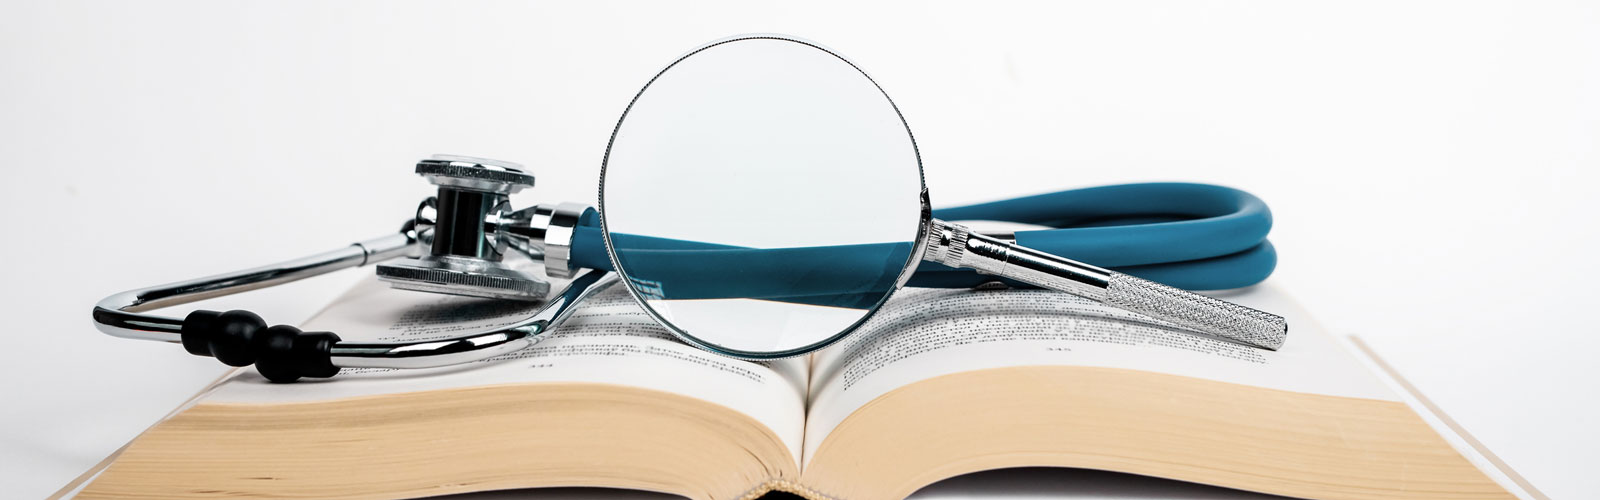 magnifying glass with stethoscope on book 